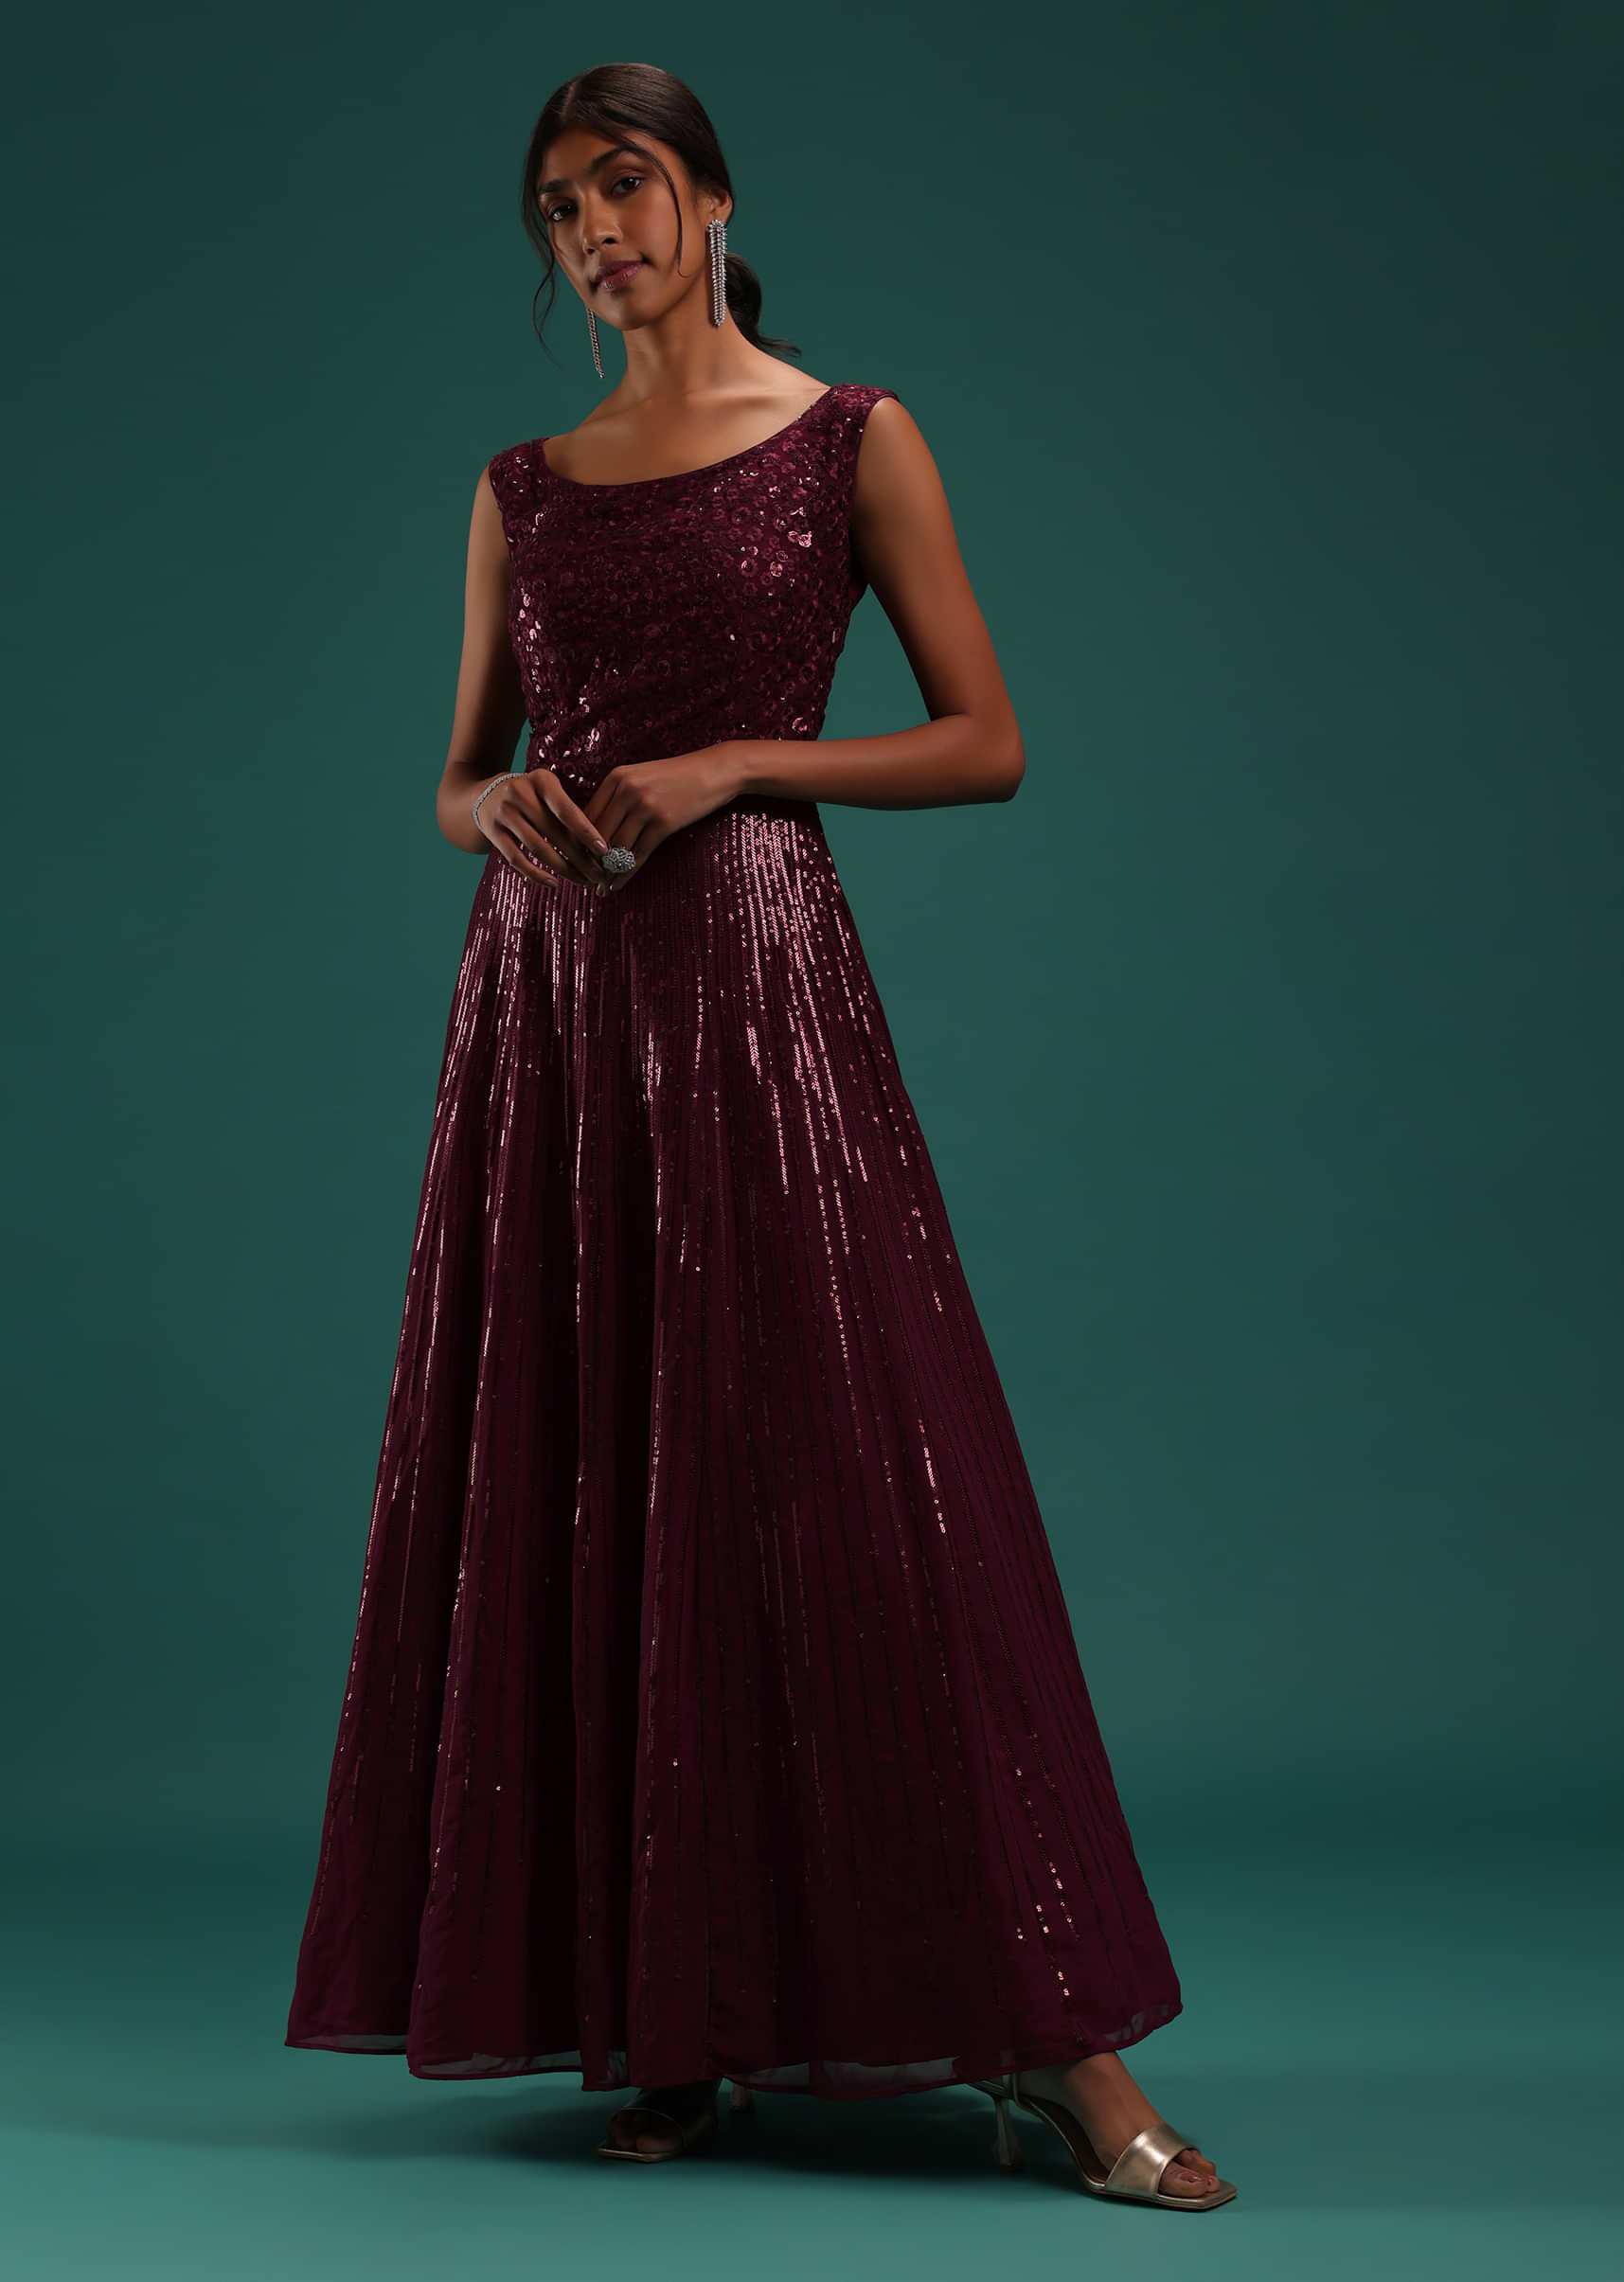 modest maroon long sleeves prom dresses elegant v neck evening gowns with  sleev on Stylevore